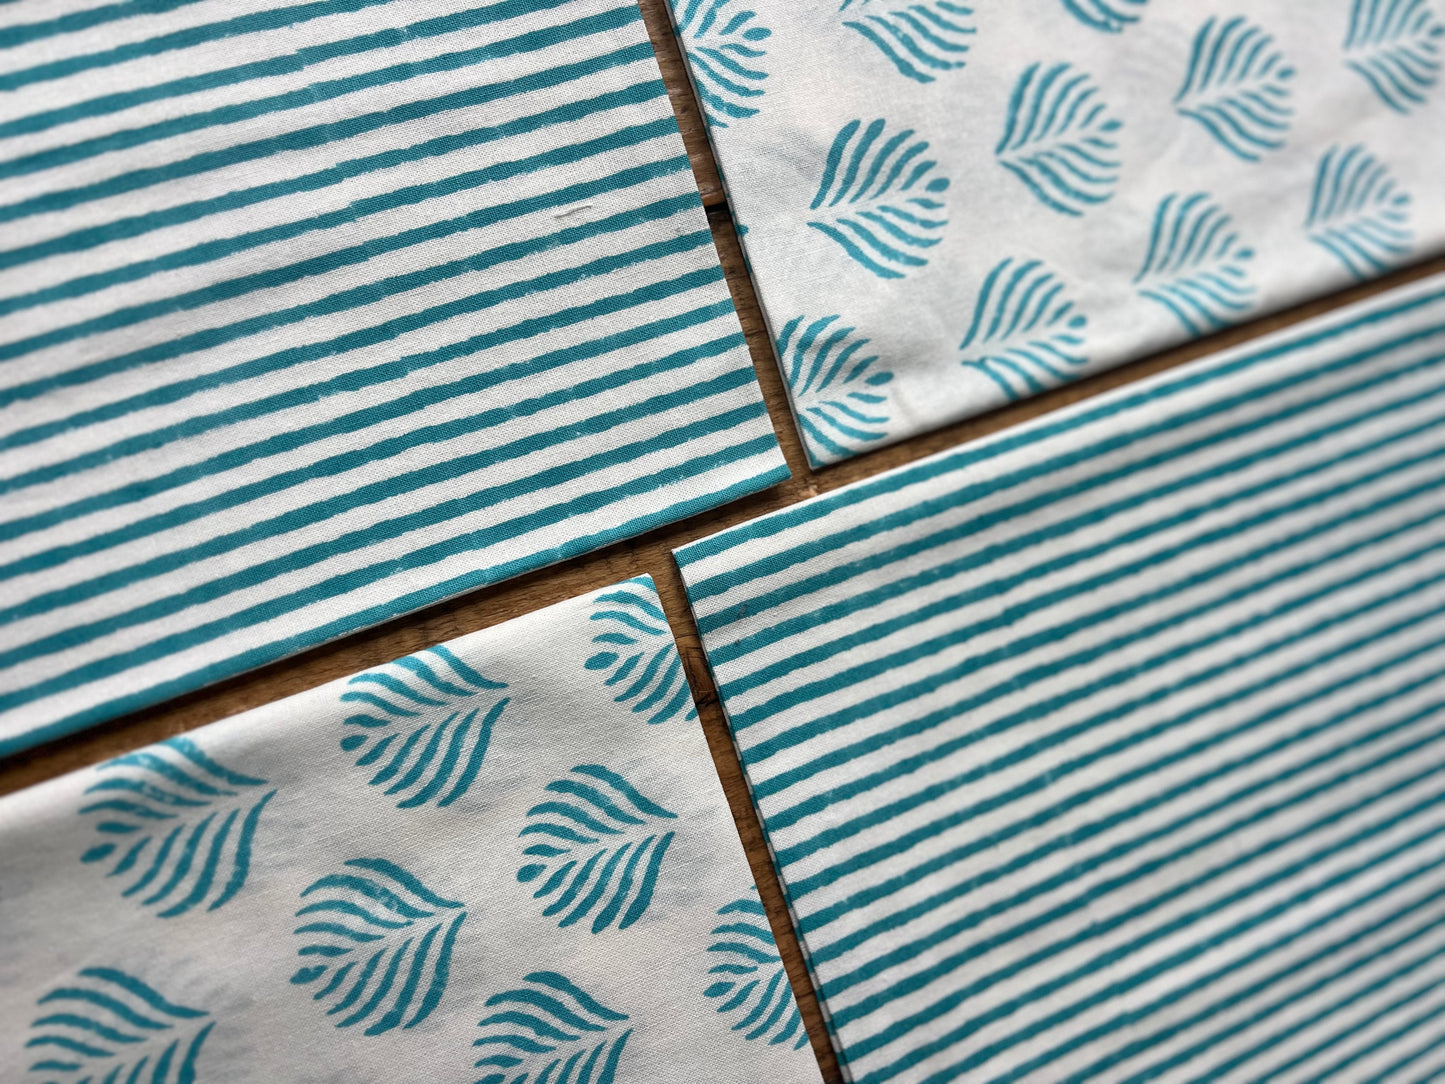 Coral Flame Napkins in Turquoise - Set of 4